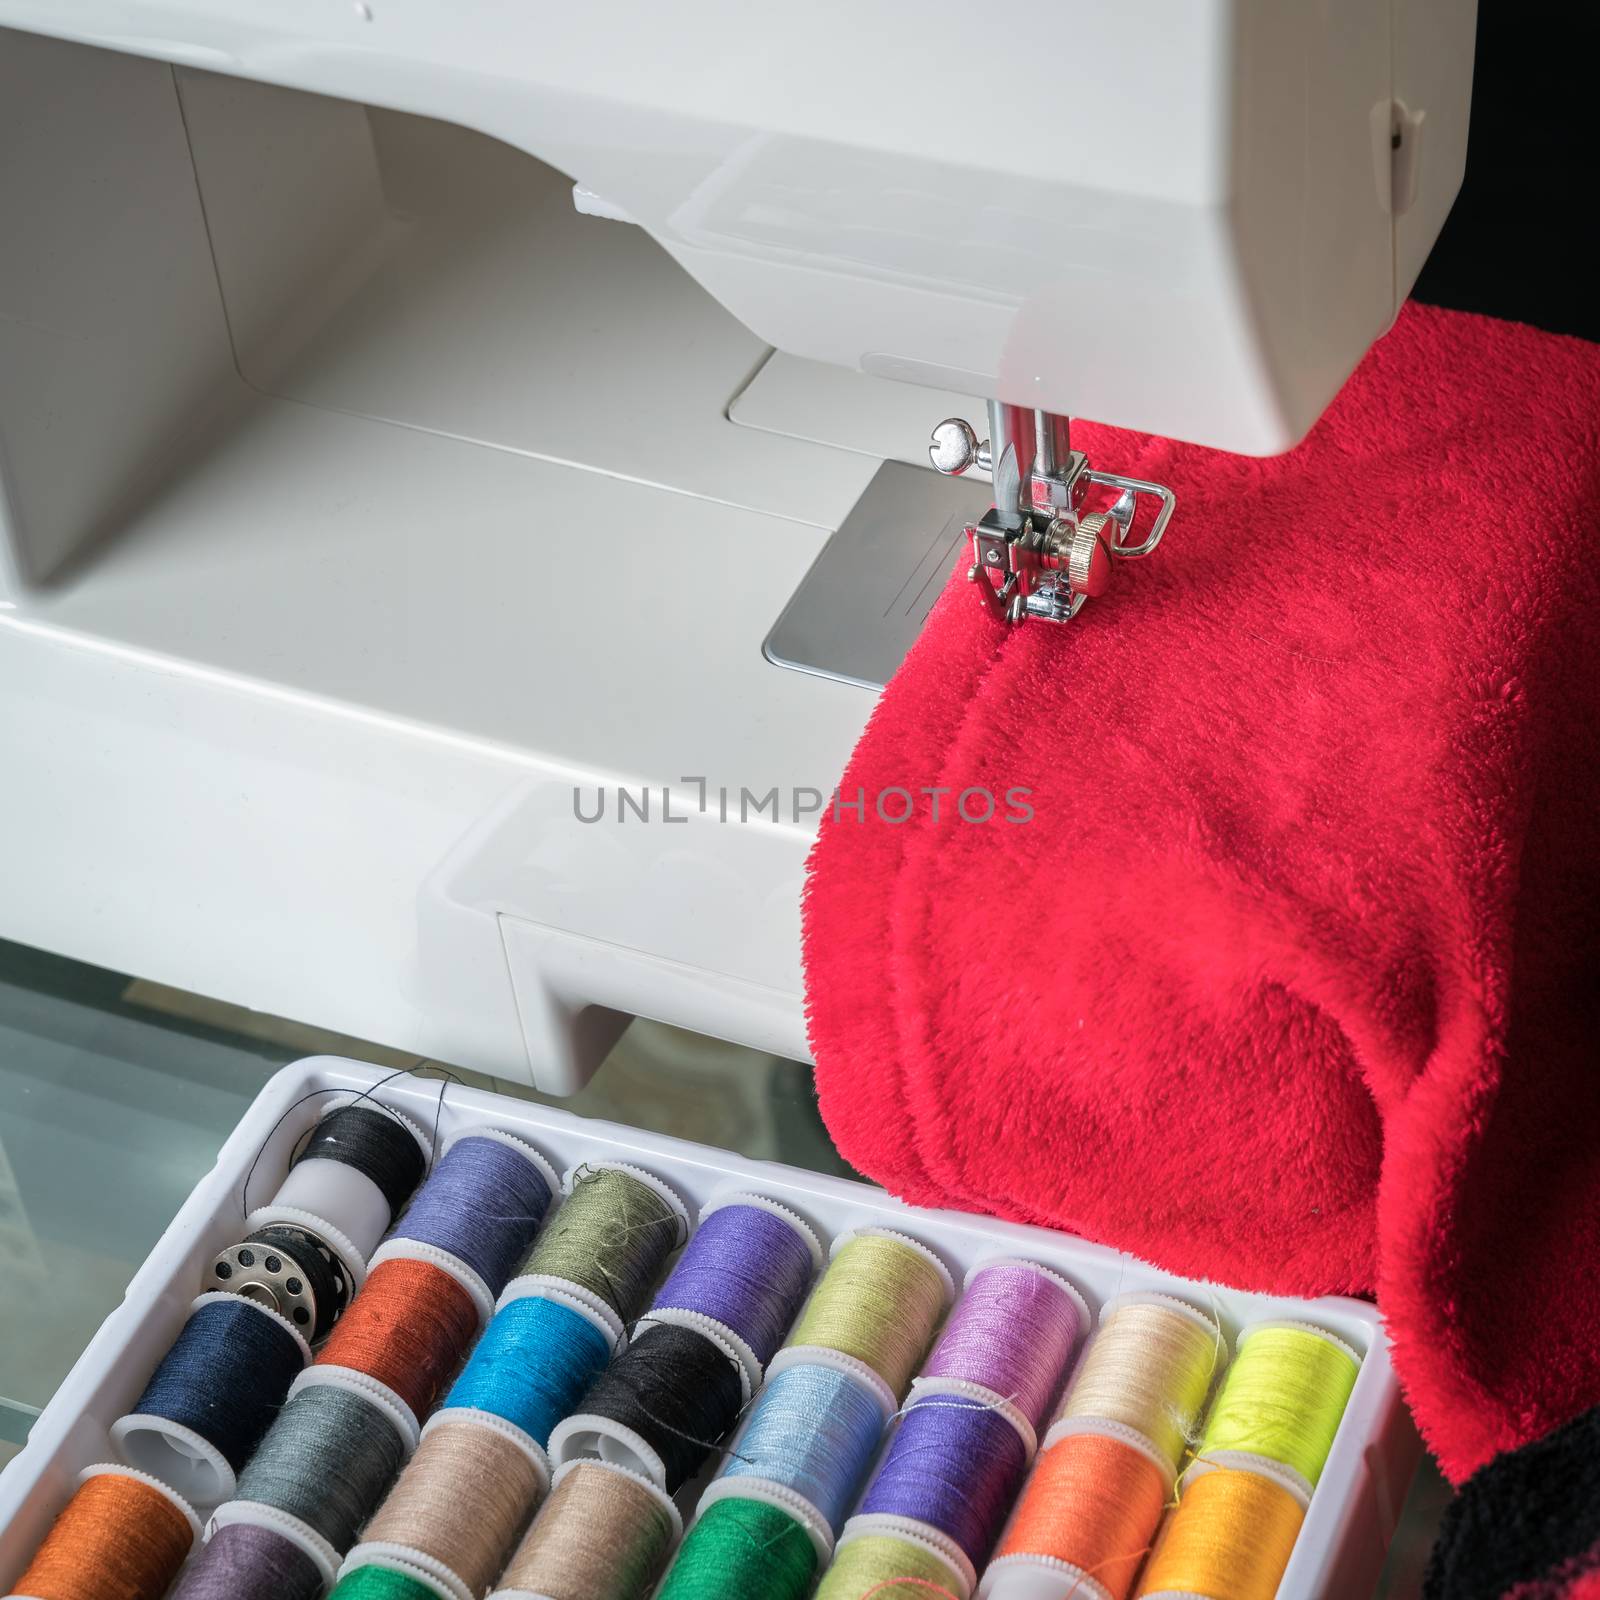 sewing machine and red cloth, sewing process in the phase of overstitching,colored spools.